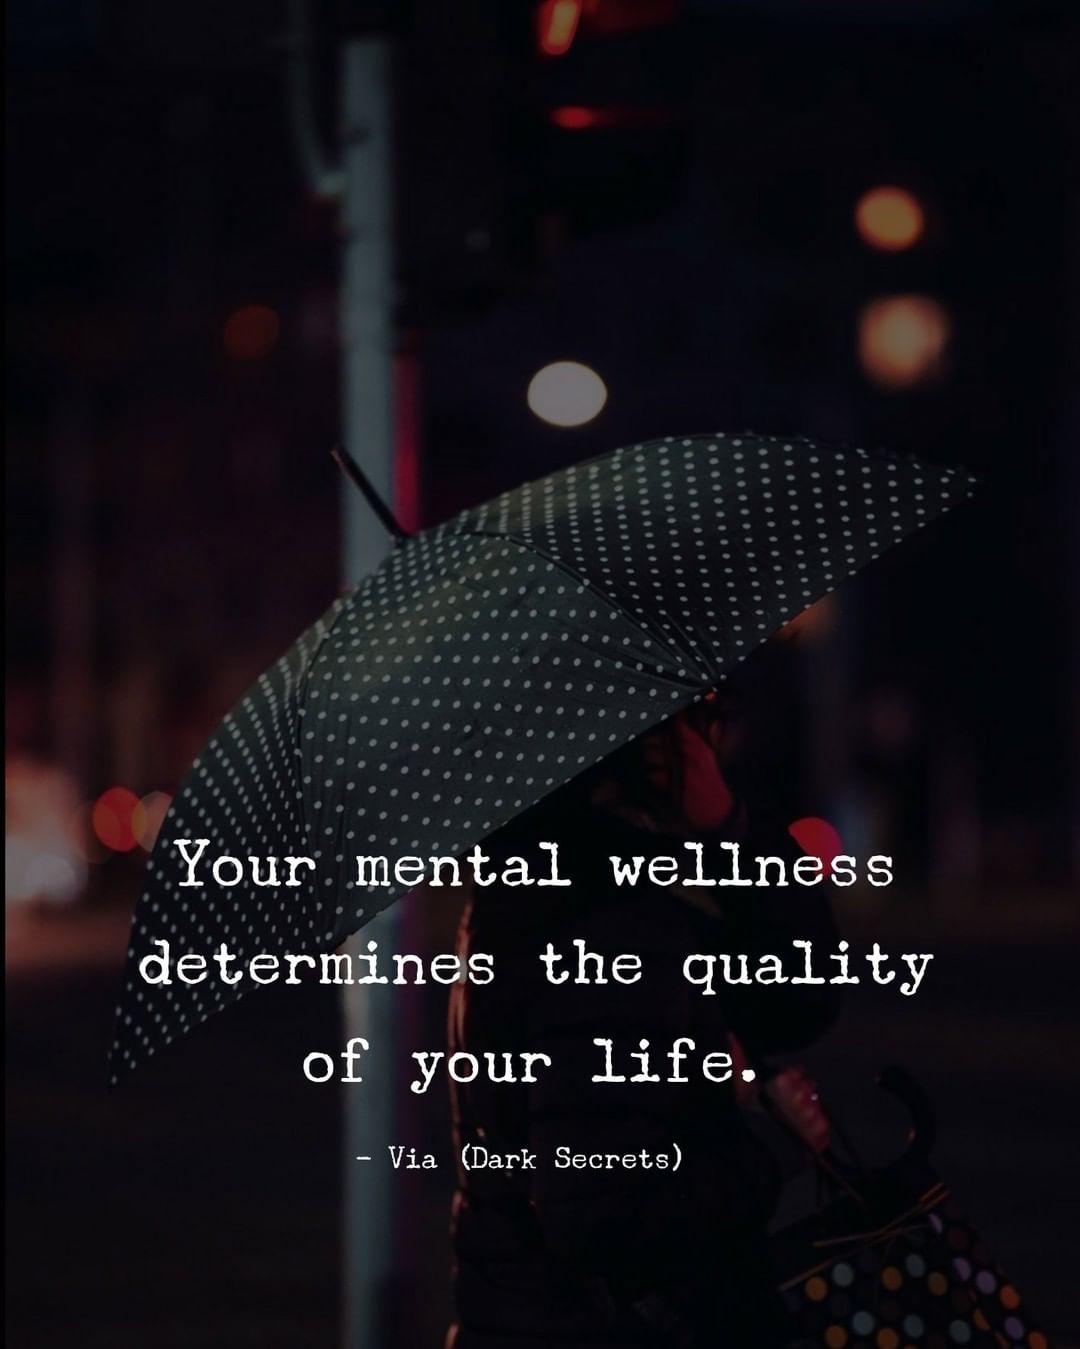 Your mental wellness determines the quality of your life.